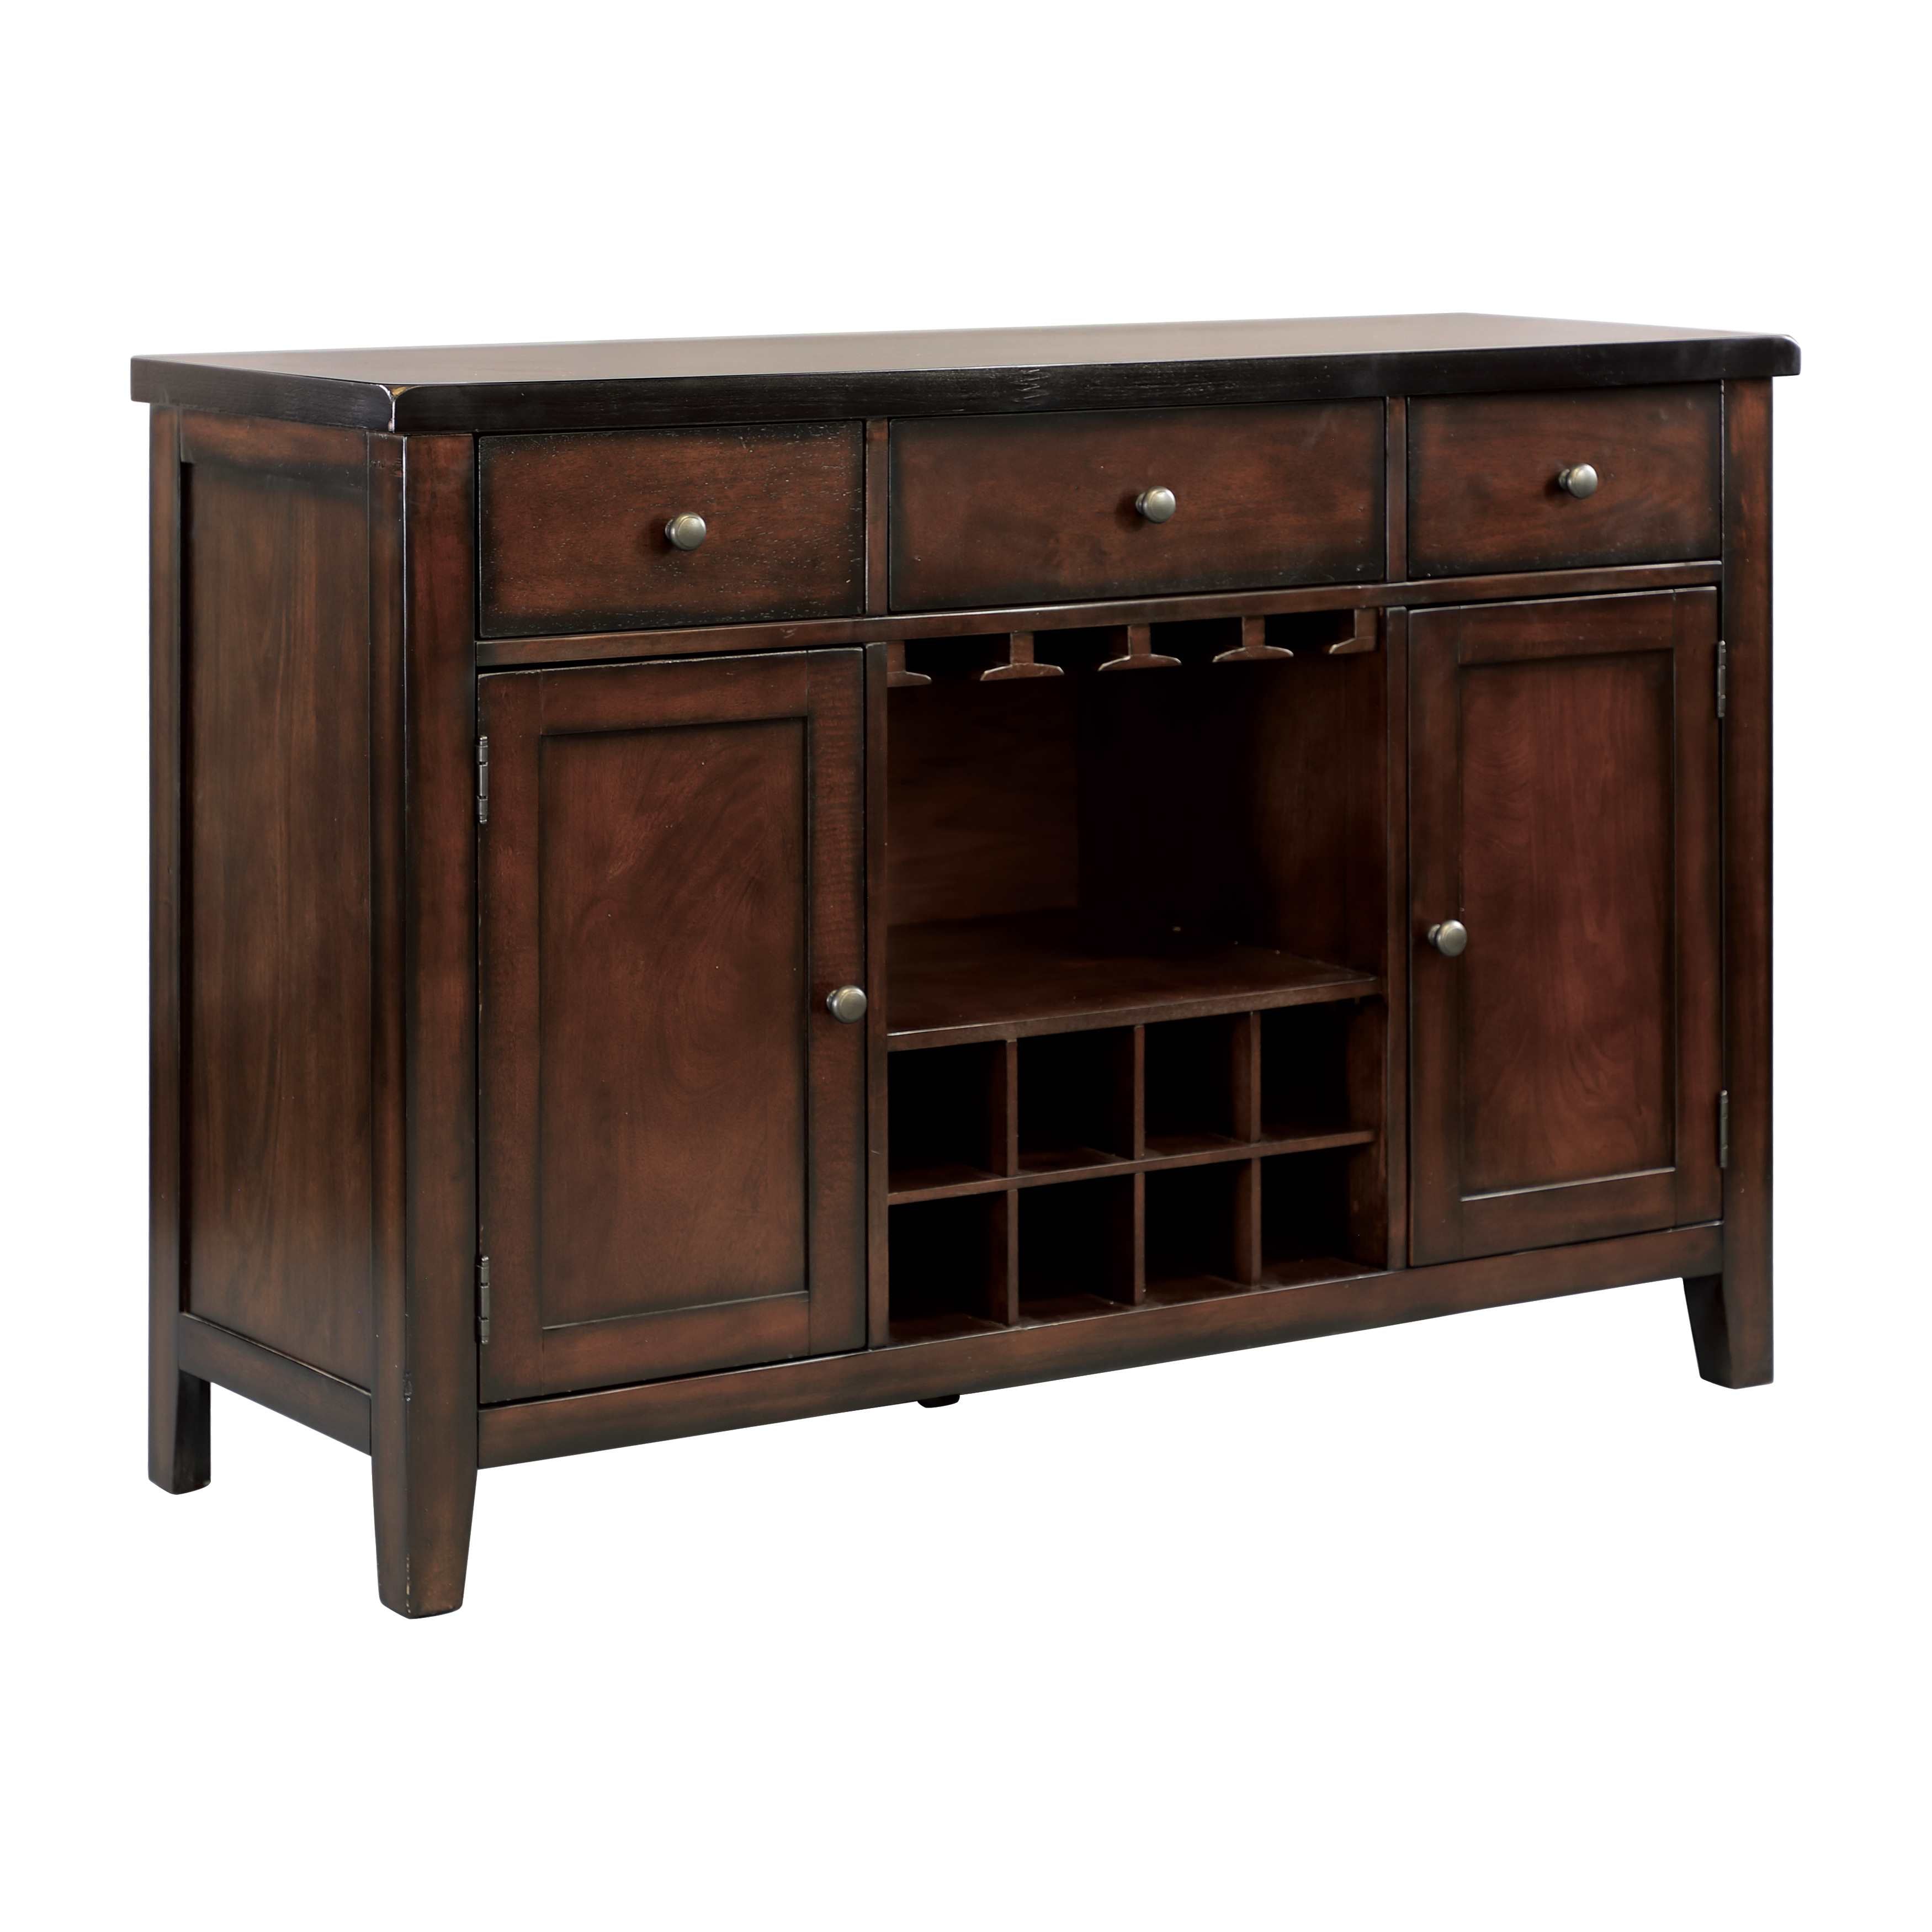 Mantello Dining Collection 5547-78